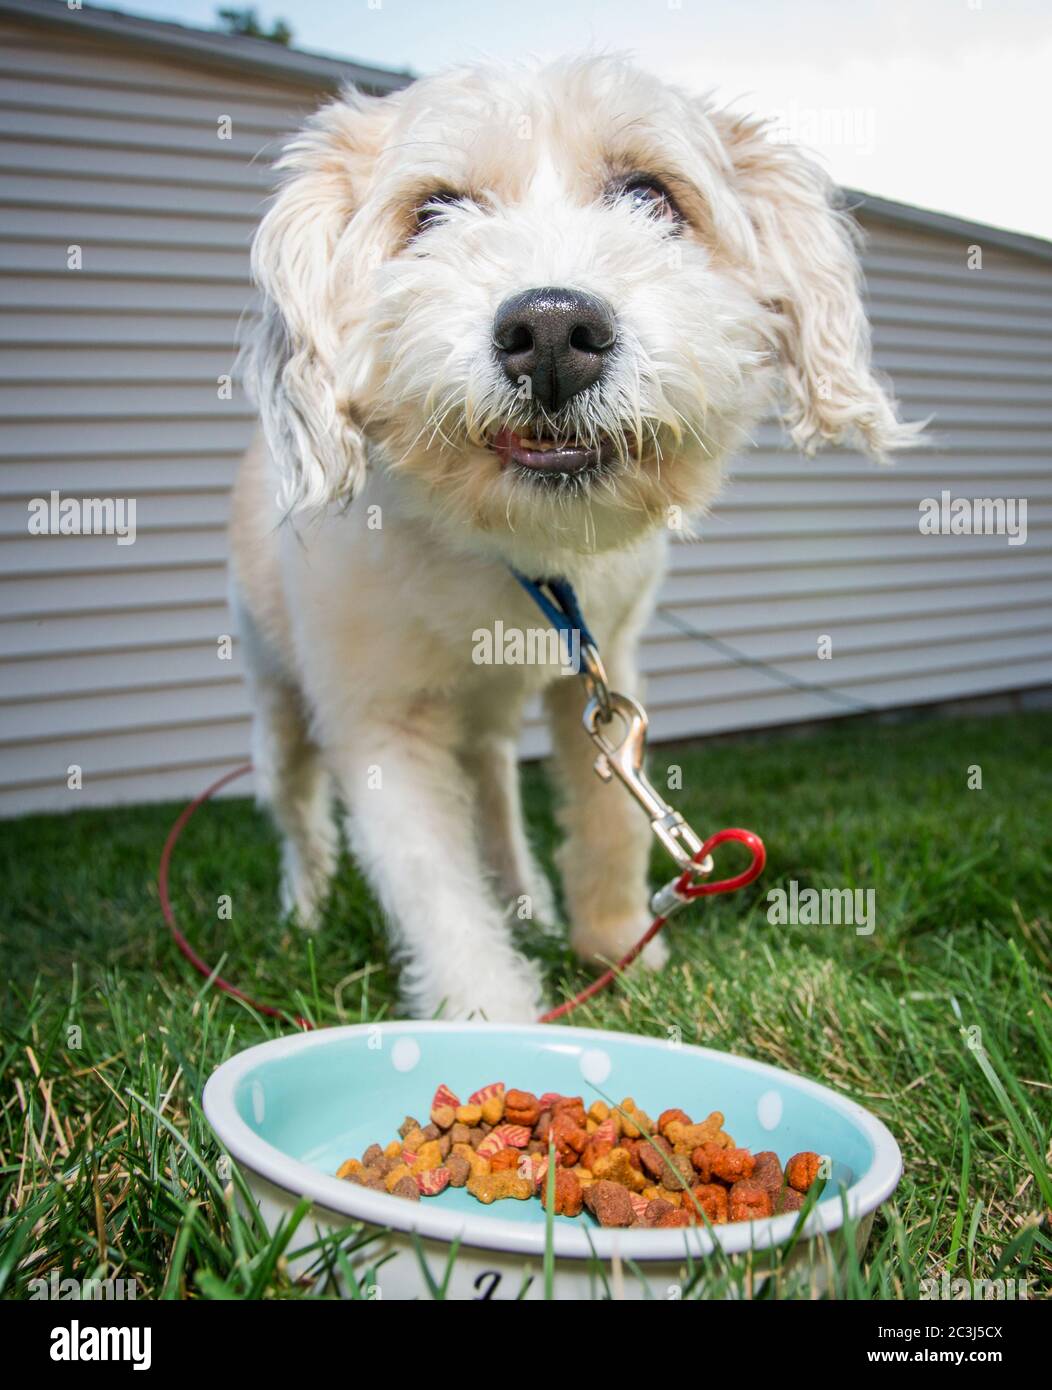 A fluffy white dog eating a bowl of dry dog food outdoors Stock Photo